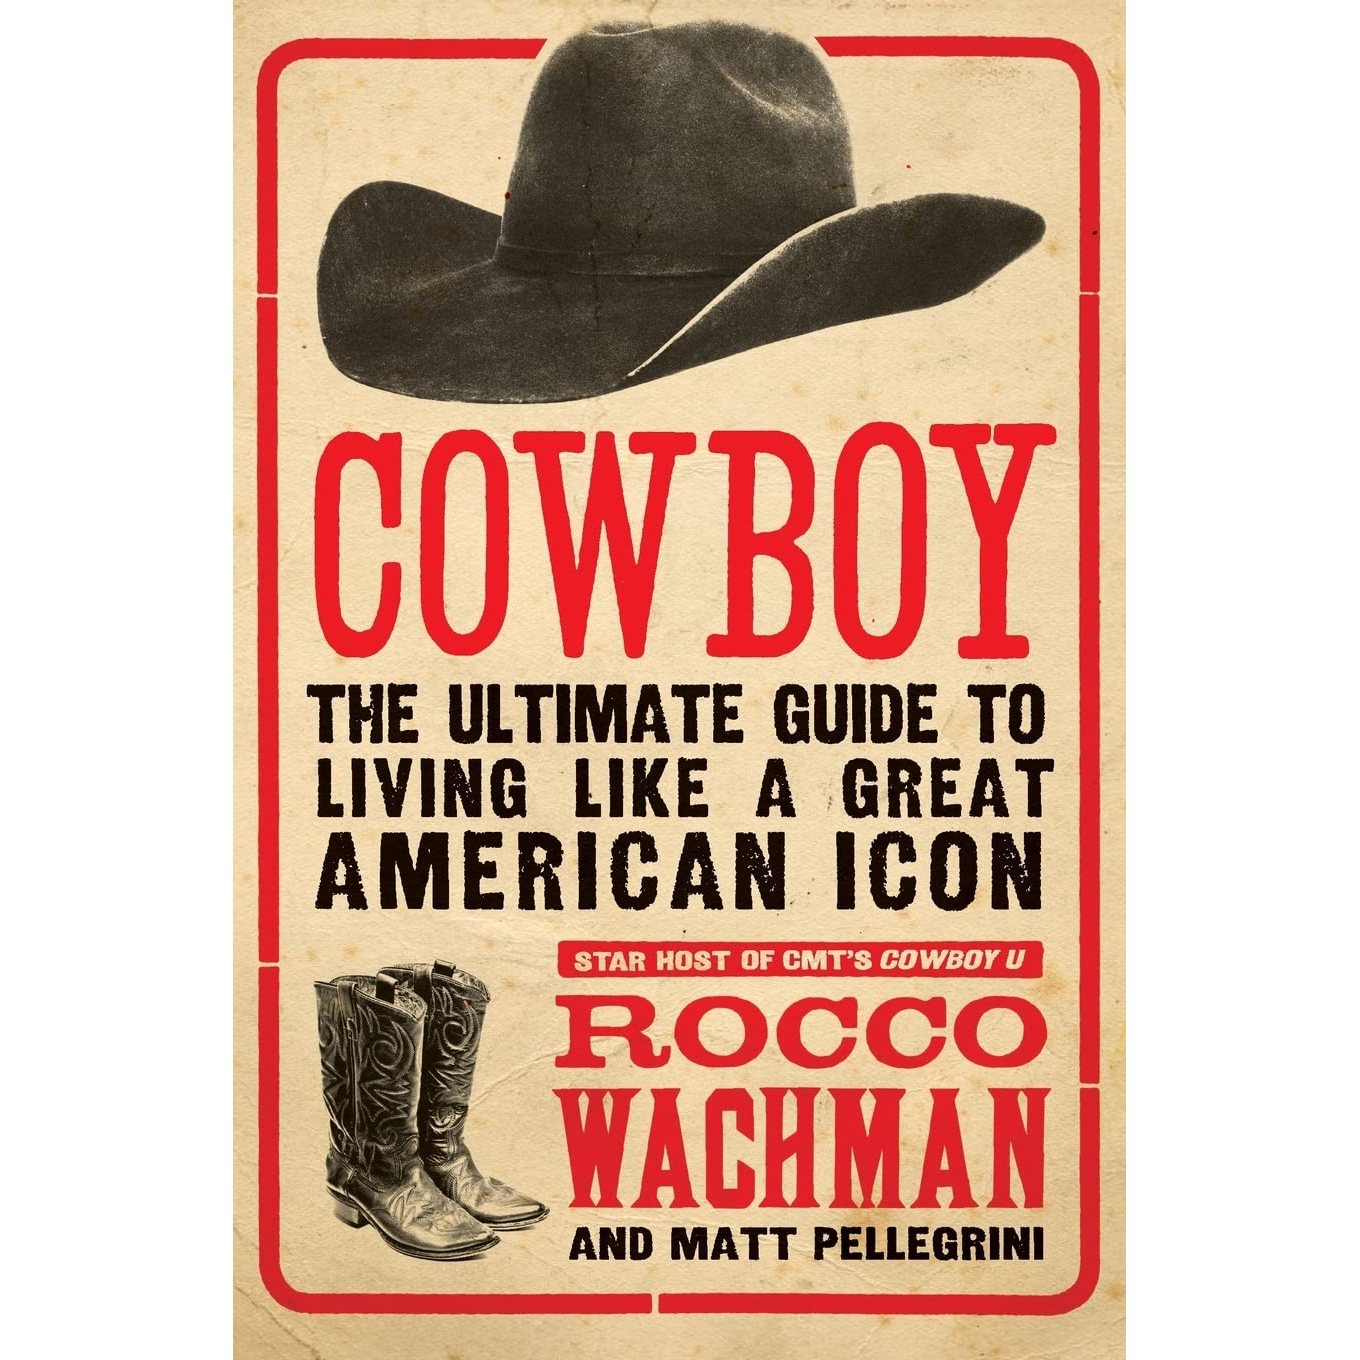 Cowboy: The Ultimate Guide to Living Like a Great American Icon by Rocco Wachman